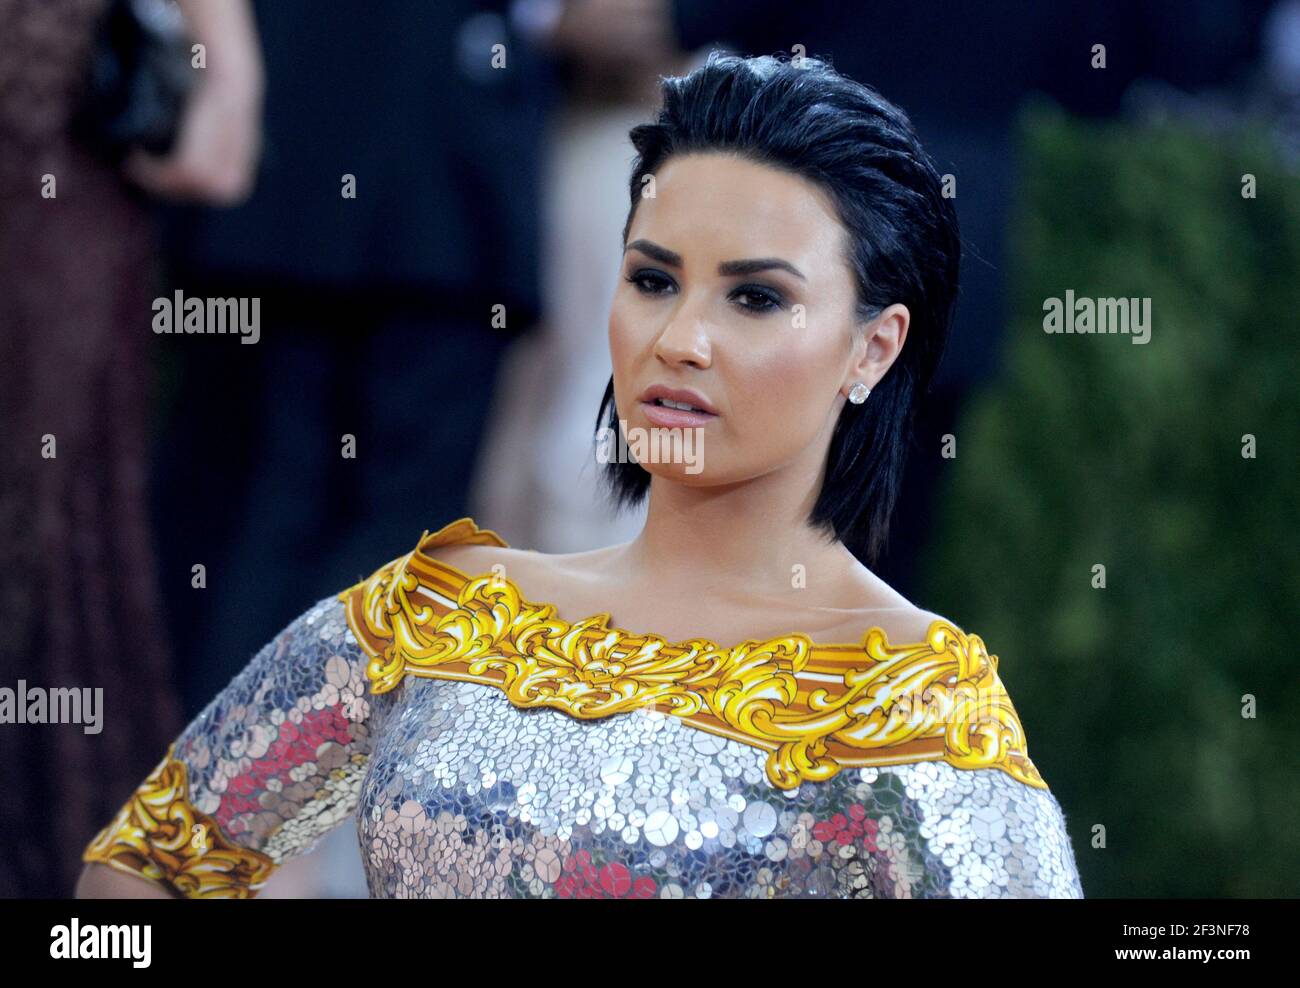 File photo dated May 2, 2016 of Demi Lovato attending the Manus x Machina: Fashion in an Age of Technology Costume Institute Benefit Gala at Metropolitan Museum of Art in New York City, NY, USA. - Demi Lovato says she was raped when she was just 15 and working for the Disney Channel in the late 2000s. Photo by Dennis Van Tine/ABACAPRESS.COM Stock Photo